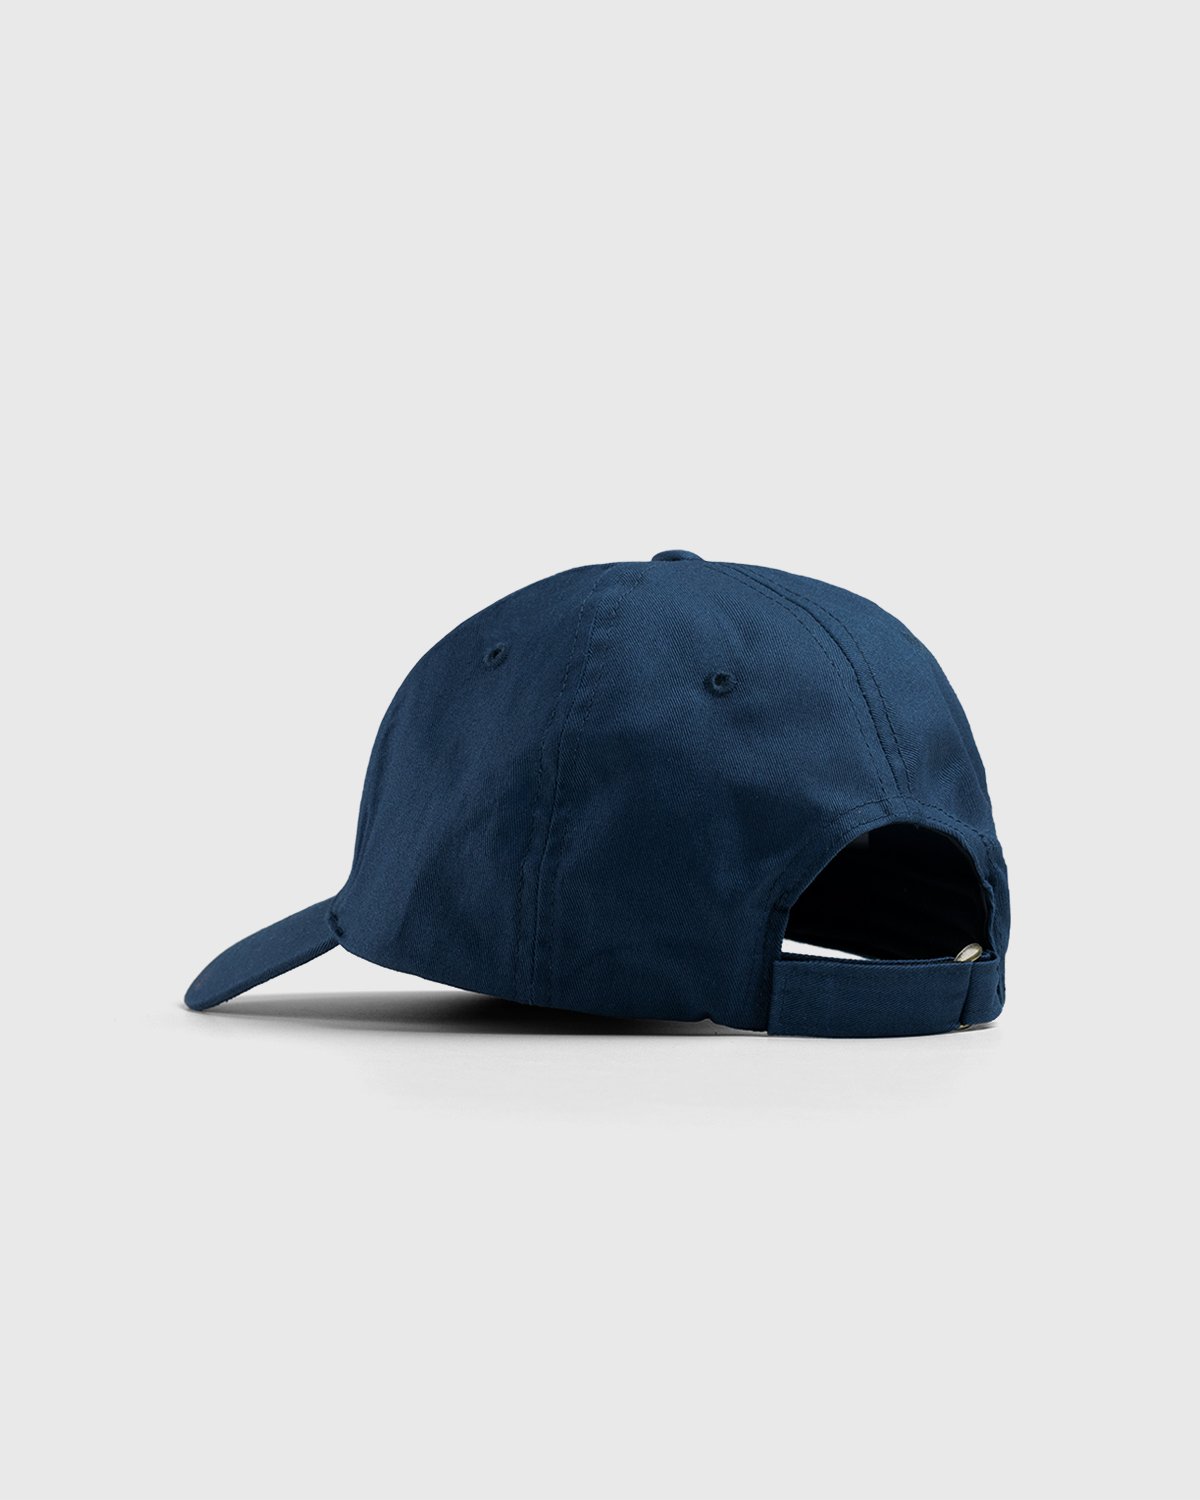 Noon Goons - Boys and Girls Hat Blue - Accessories - Blue - Image 2